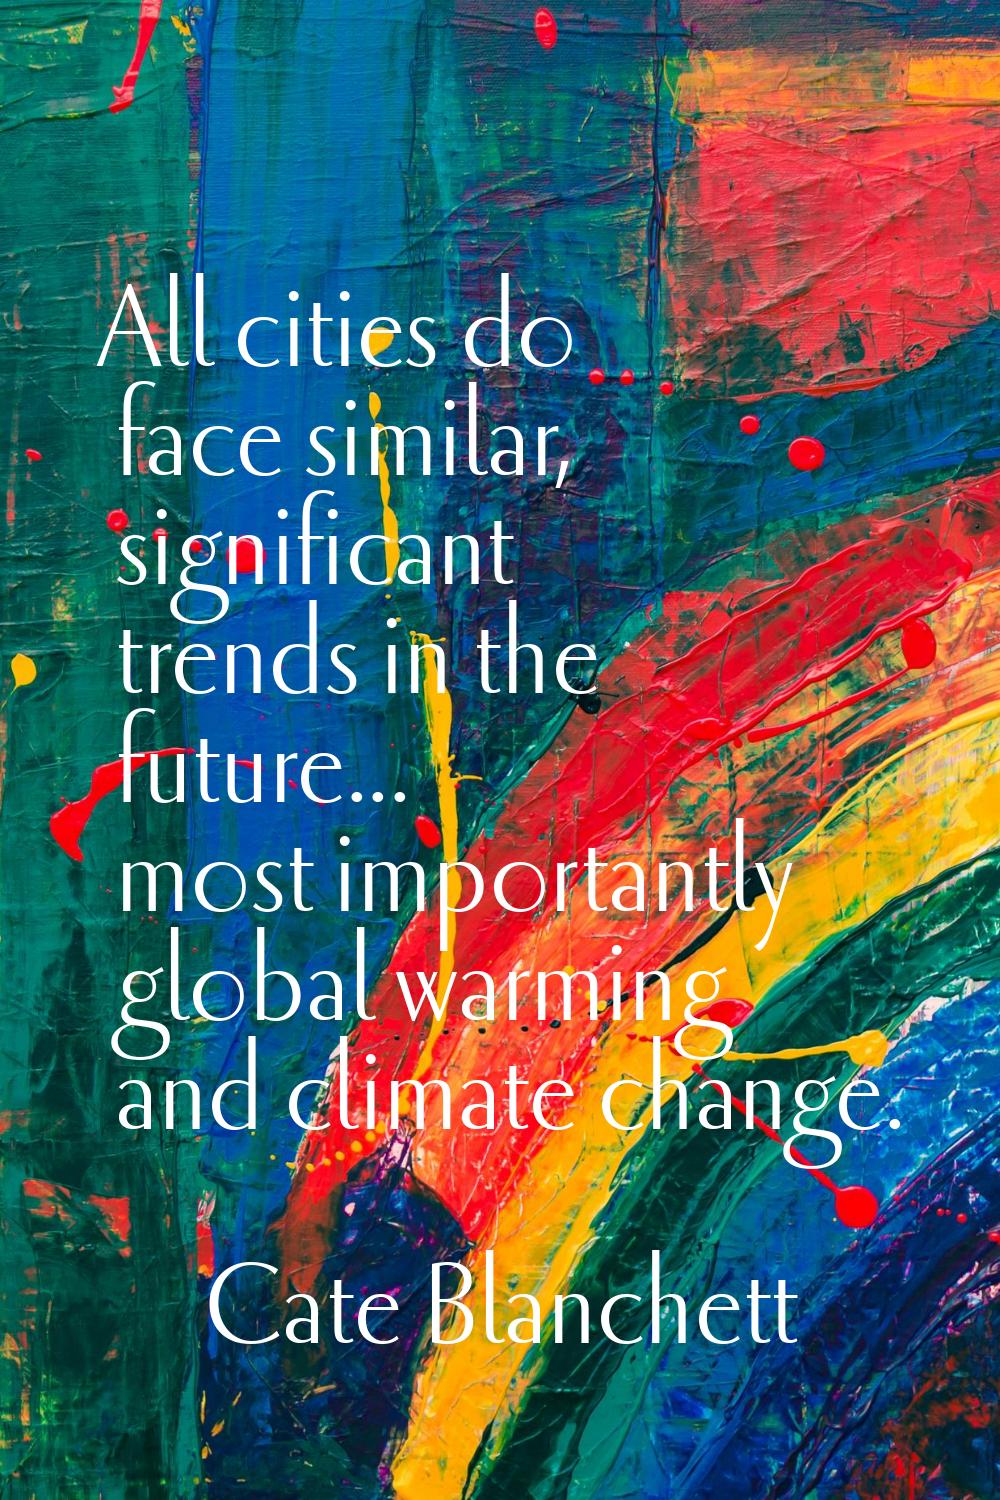 All cities do face similar, significant trends in the future... most importantly global warming and